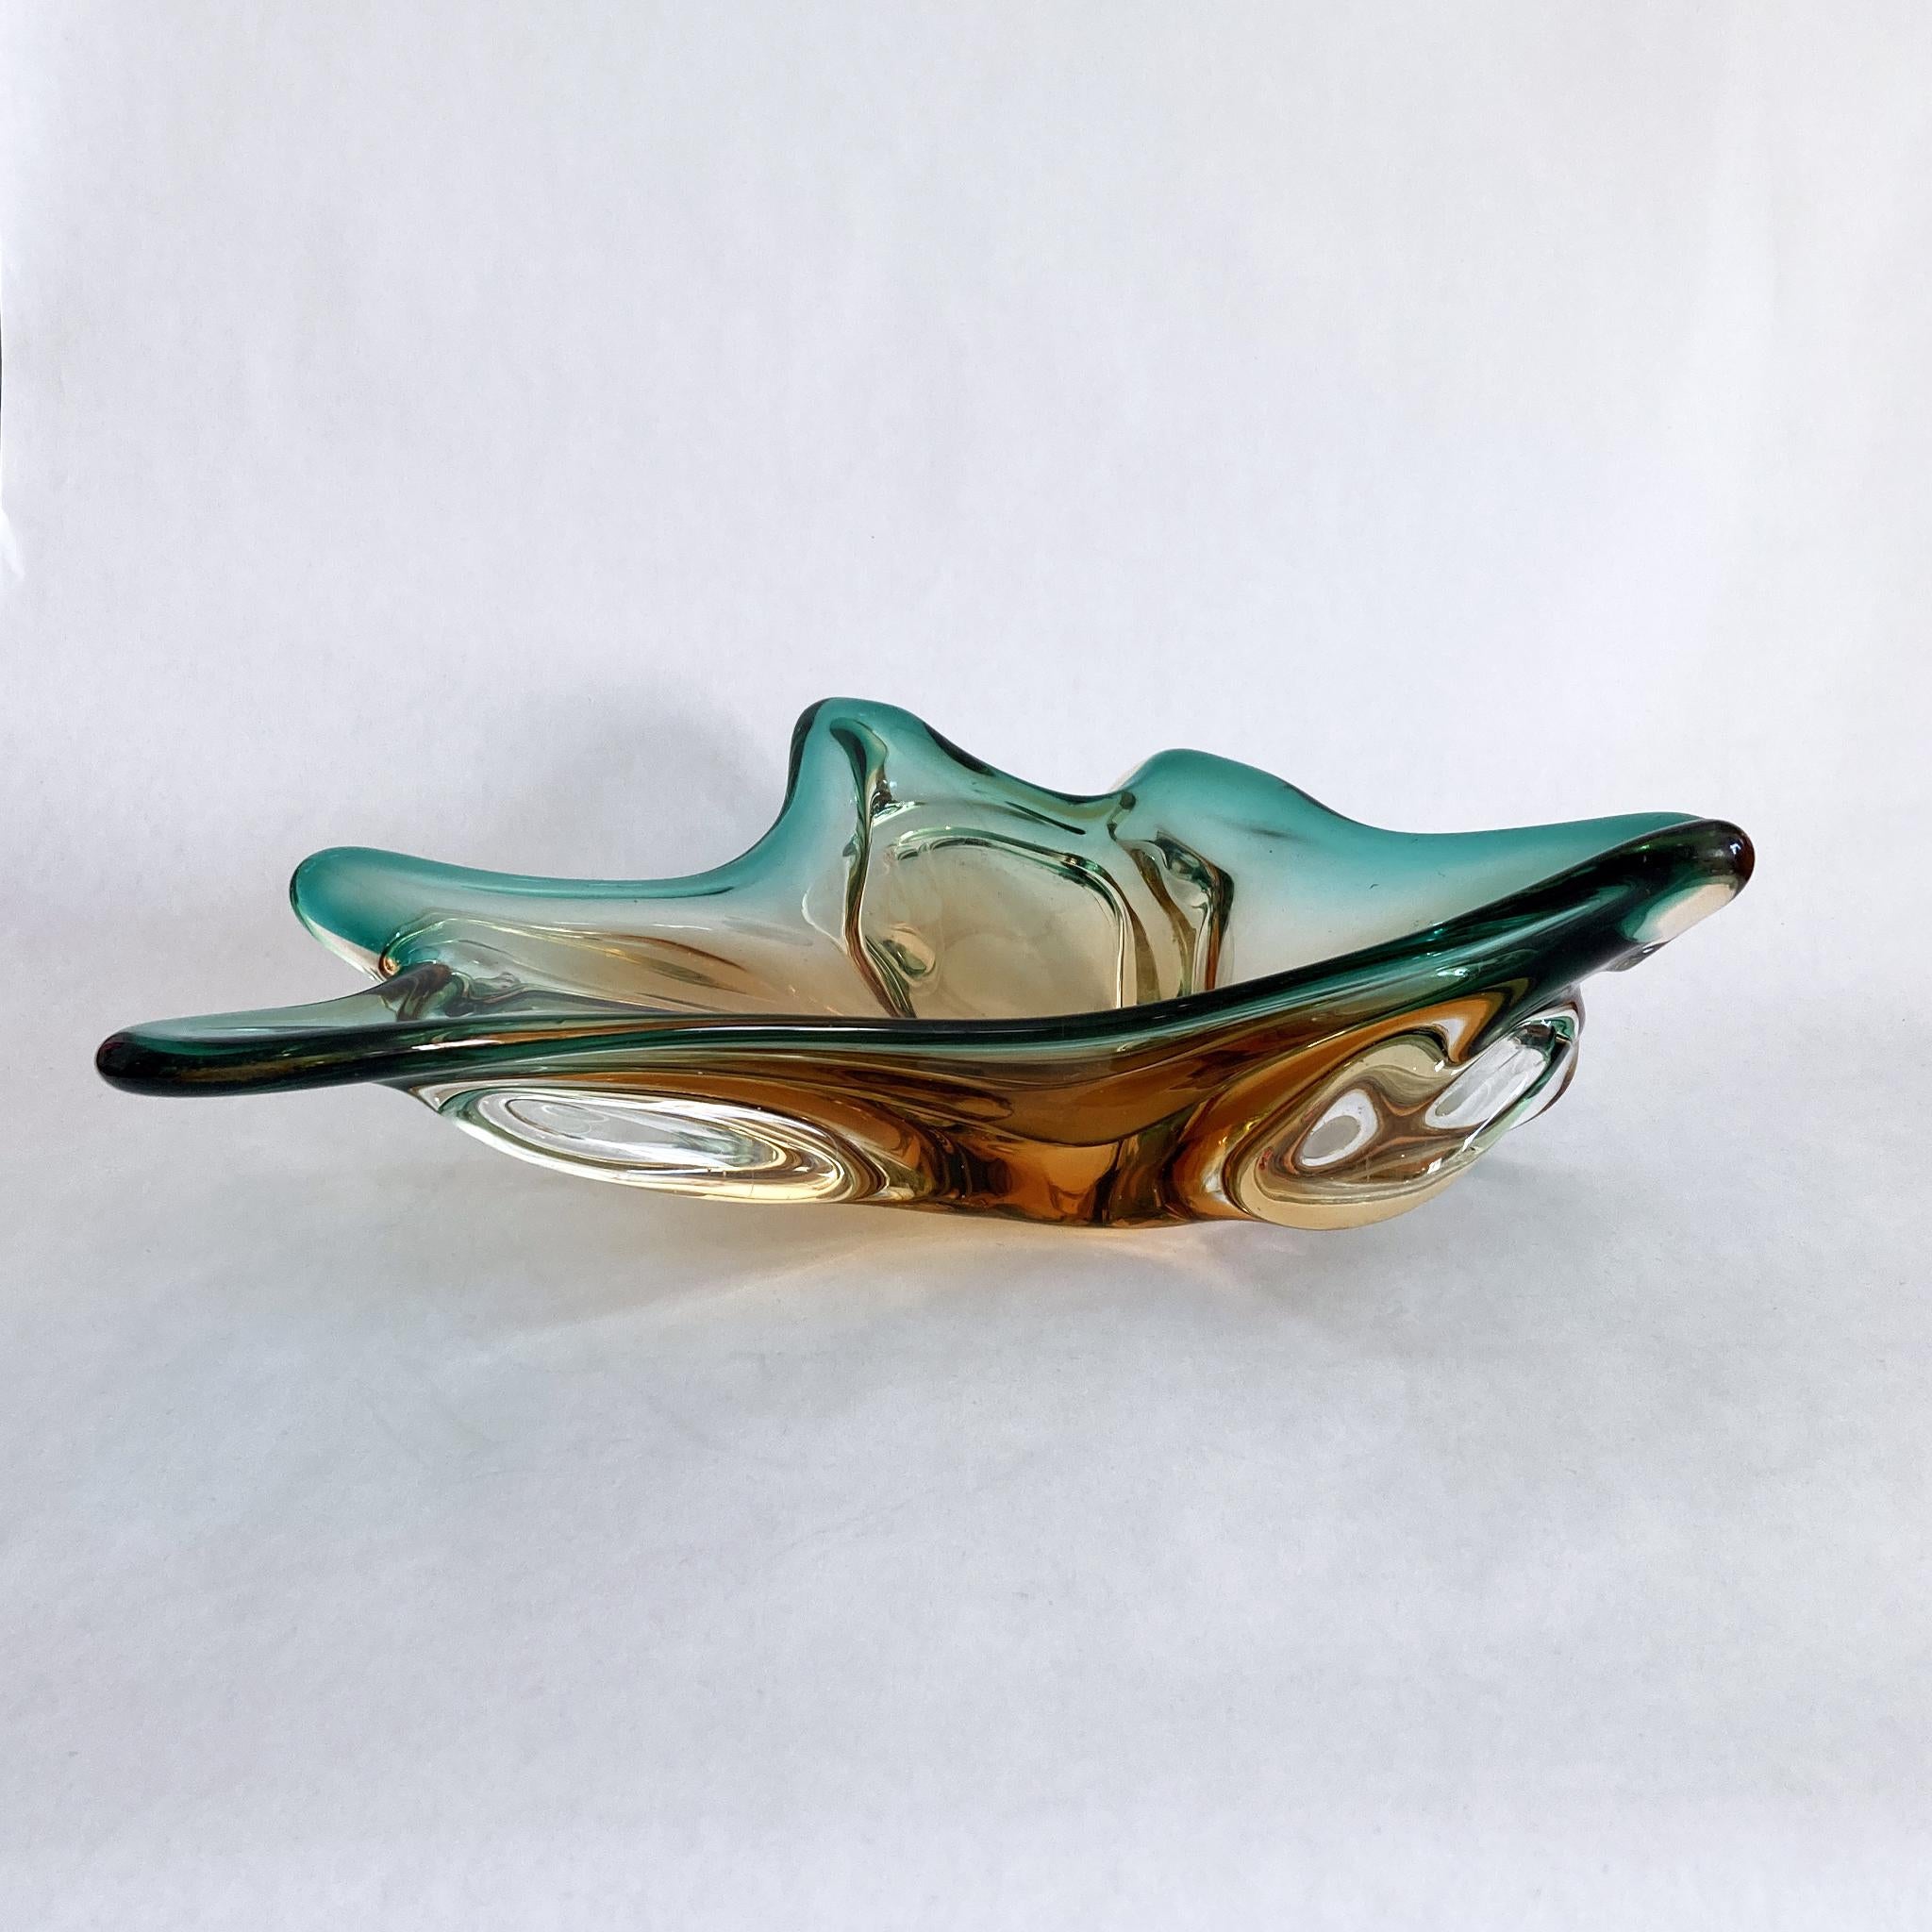 Italian Murano Blown Glass Centerpiece Bowl in Green and Amber, 1970s